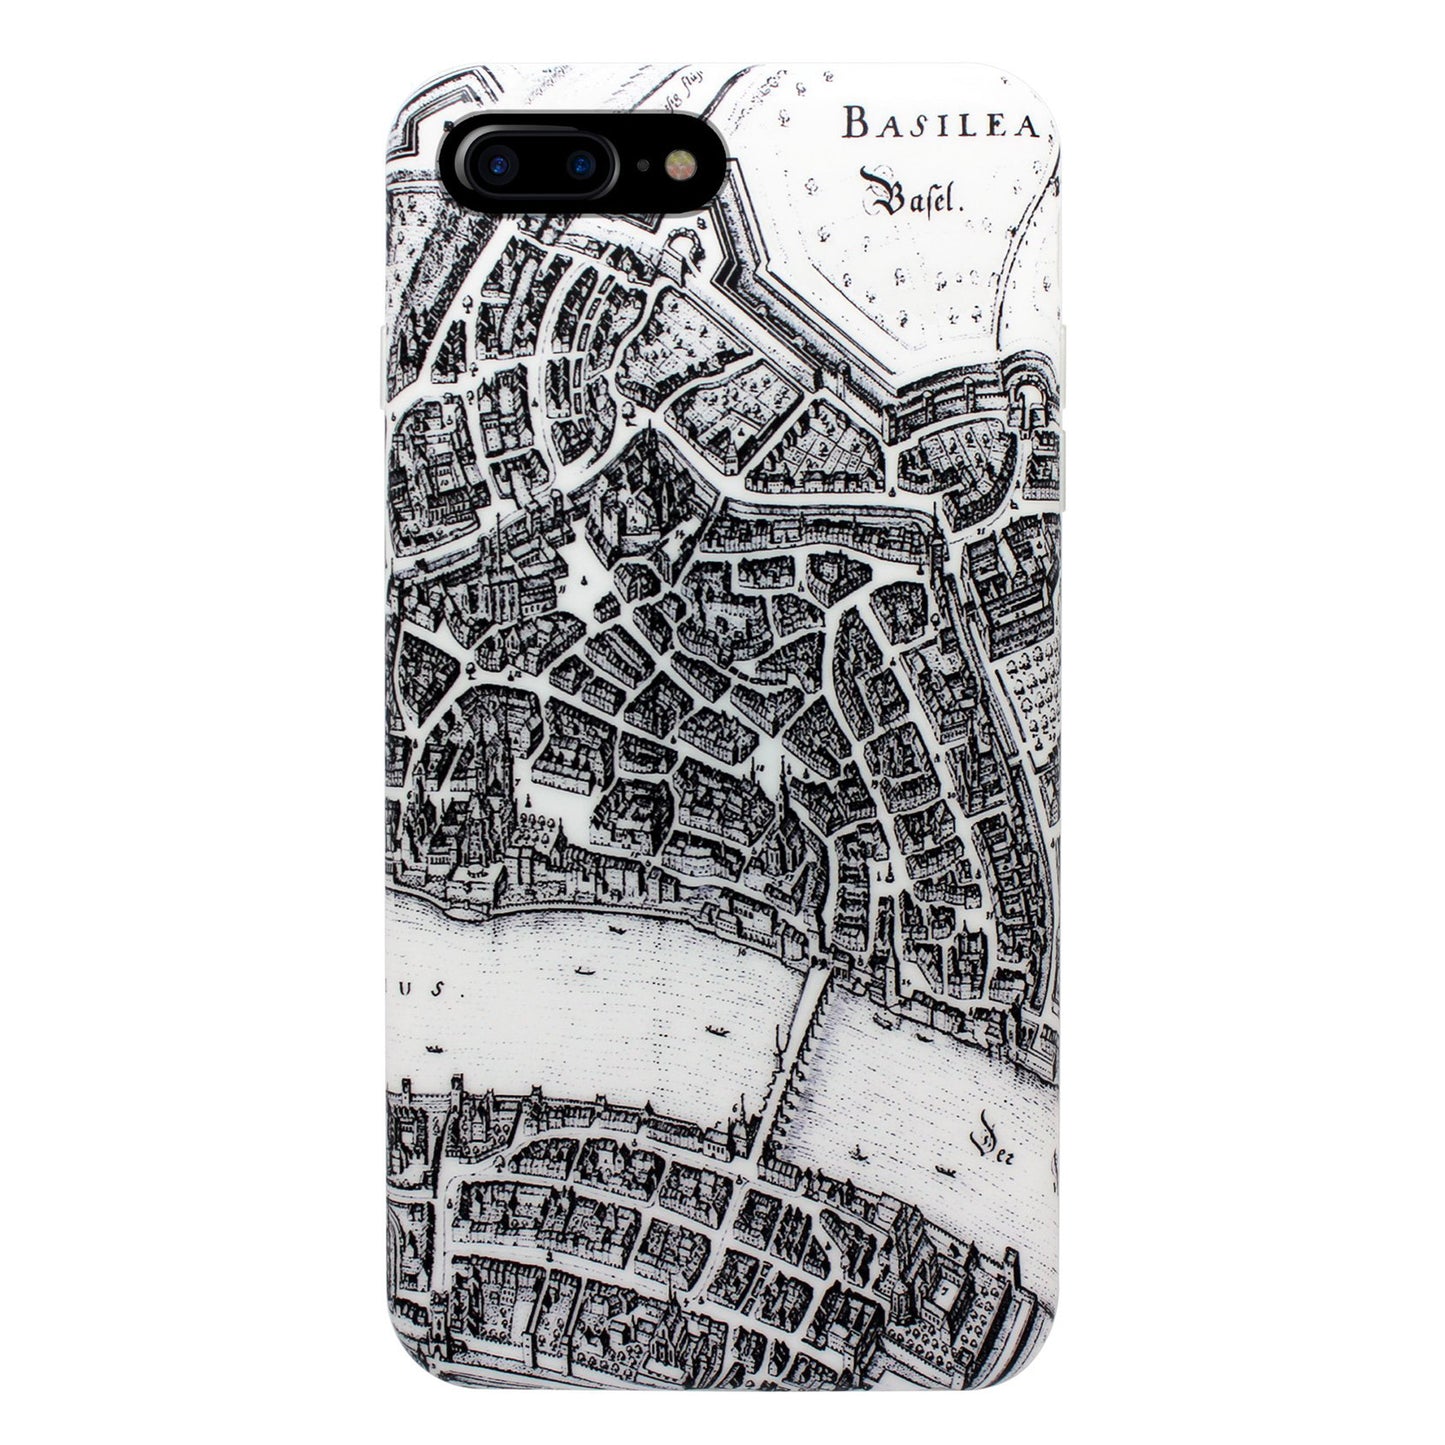 Basel Merian 360° Case for iPhone 6/6S Plus